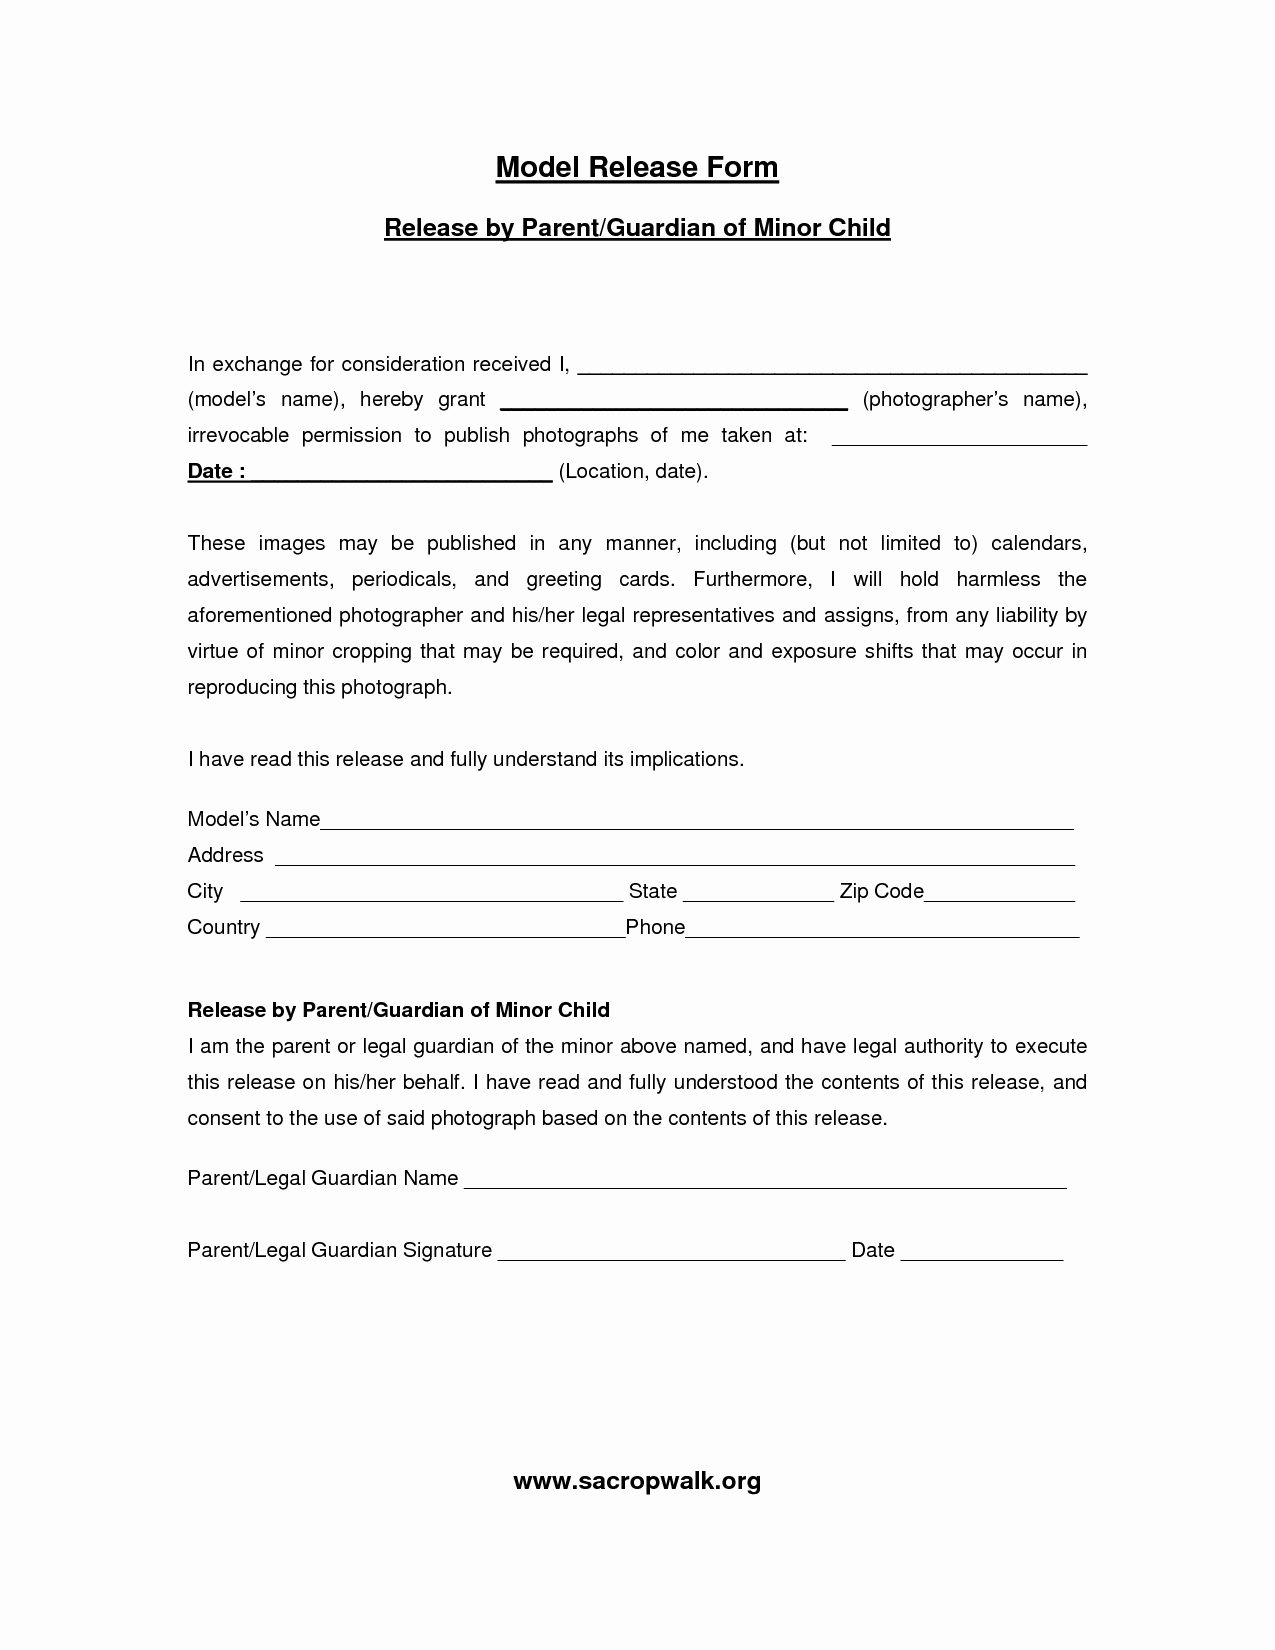 Generic Model Release form Template Inspirational Model Release form Template